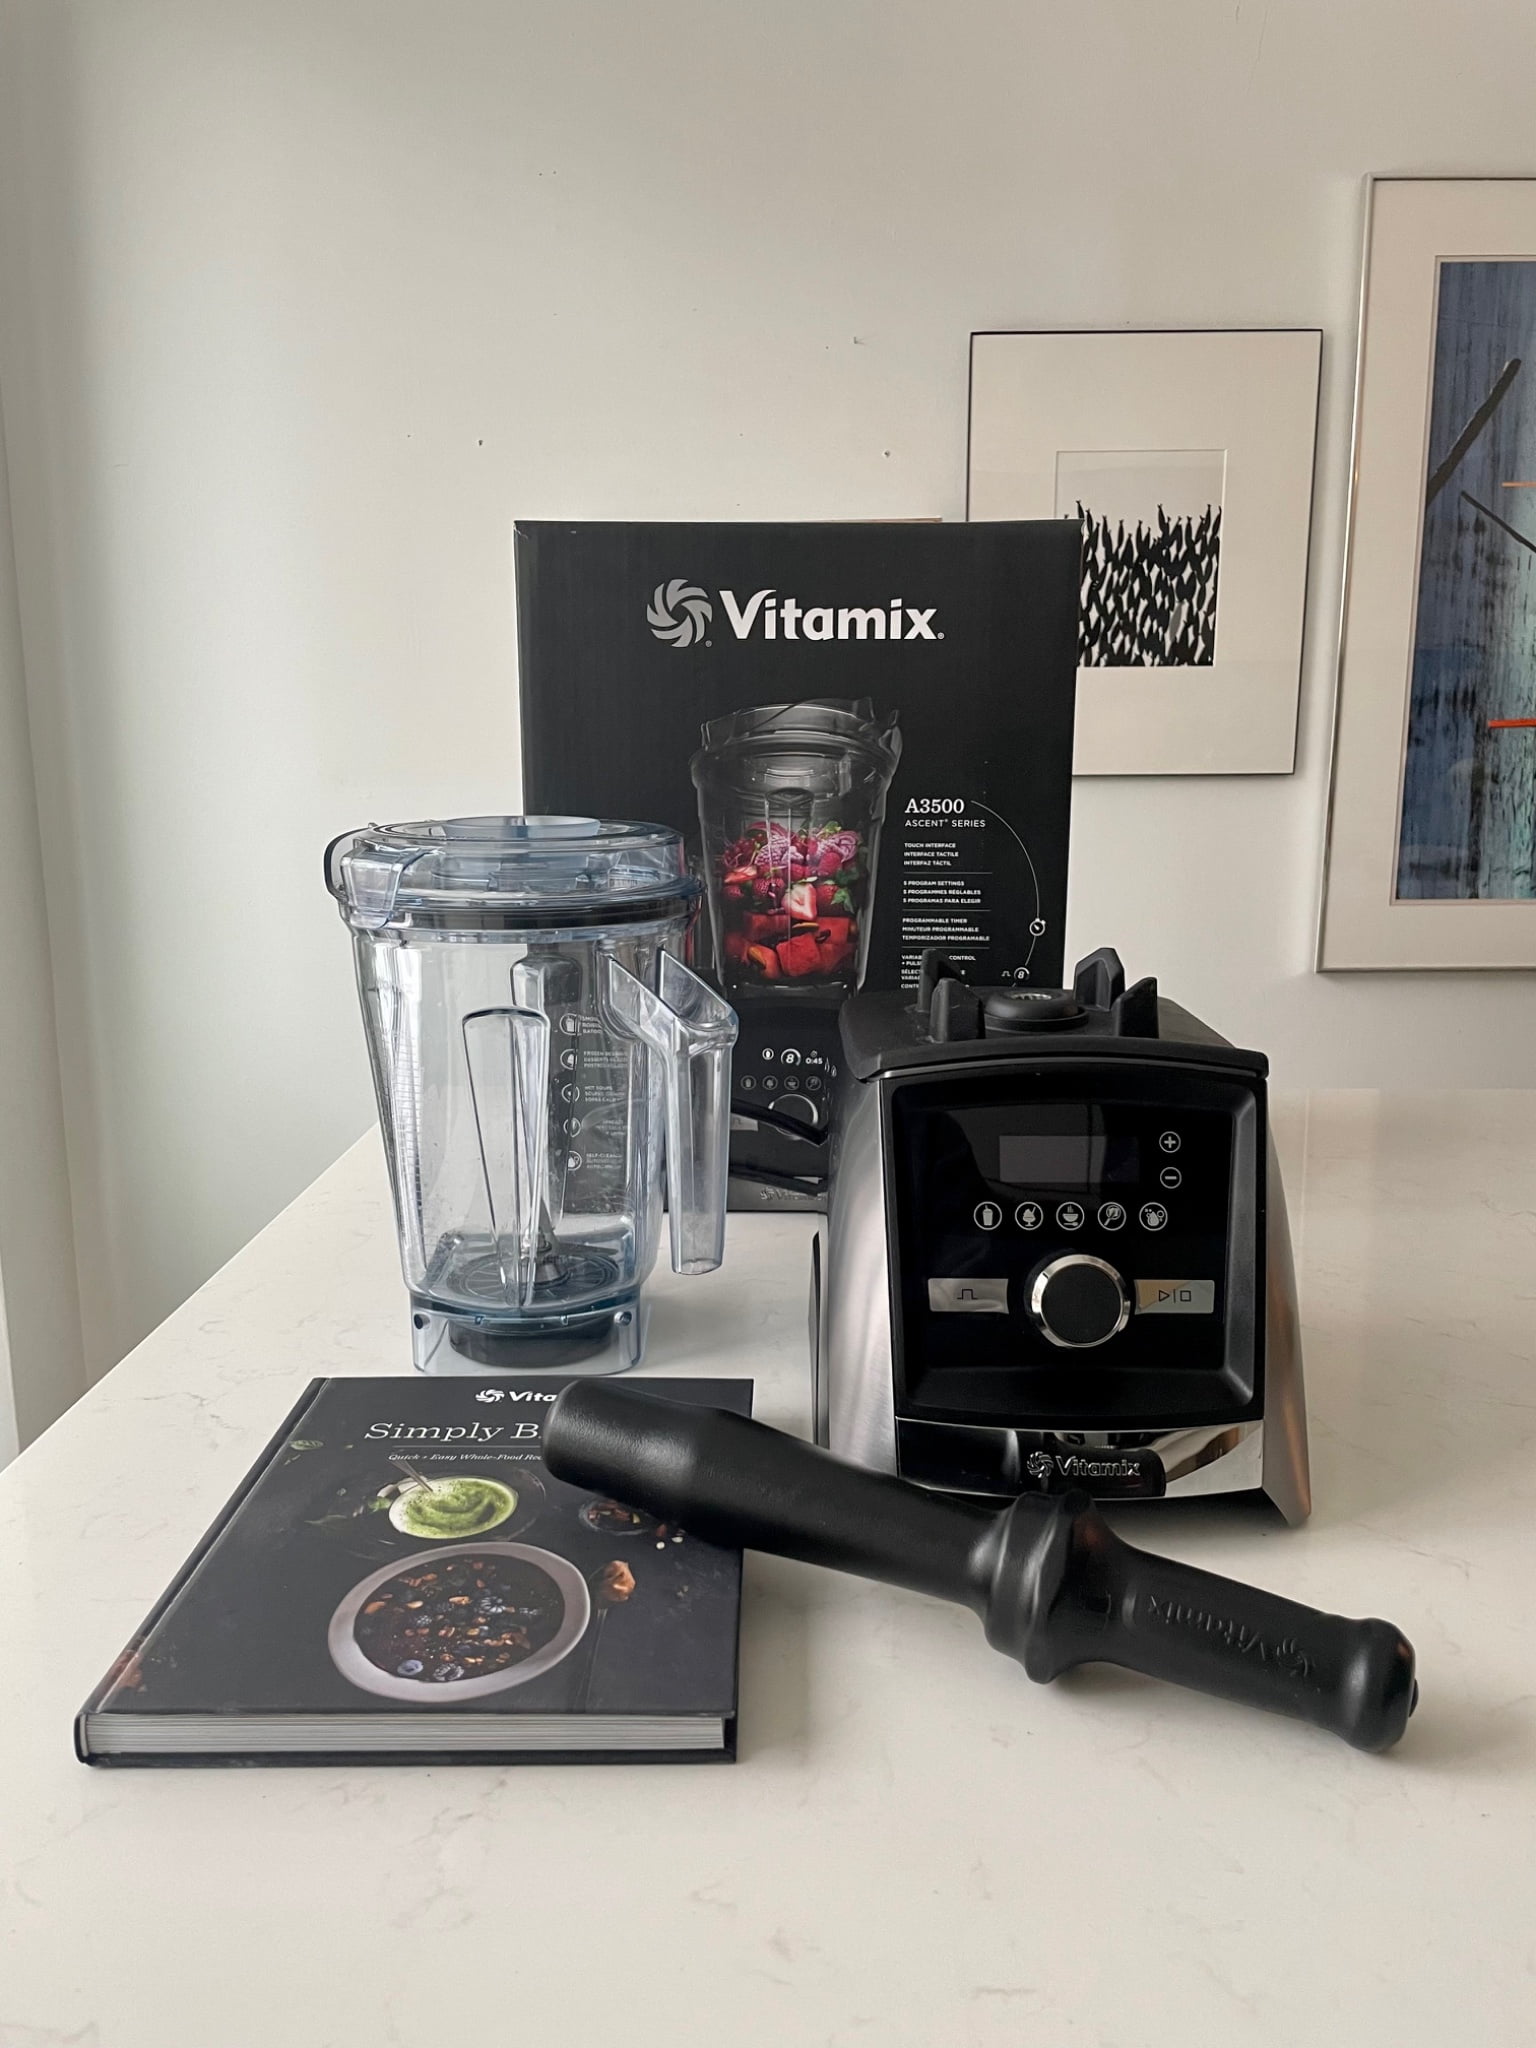 Vitamix A3500 uses a touch-screen control panel